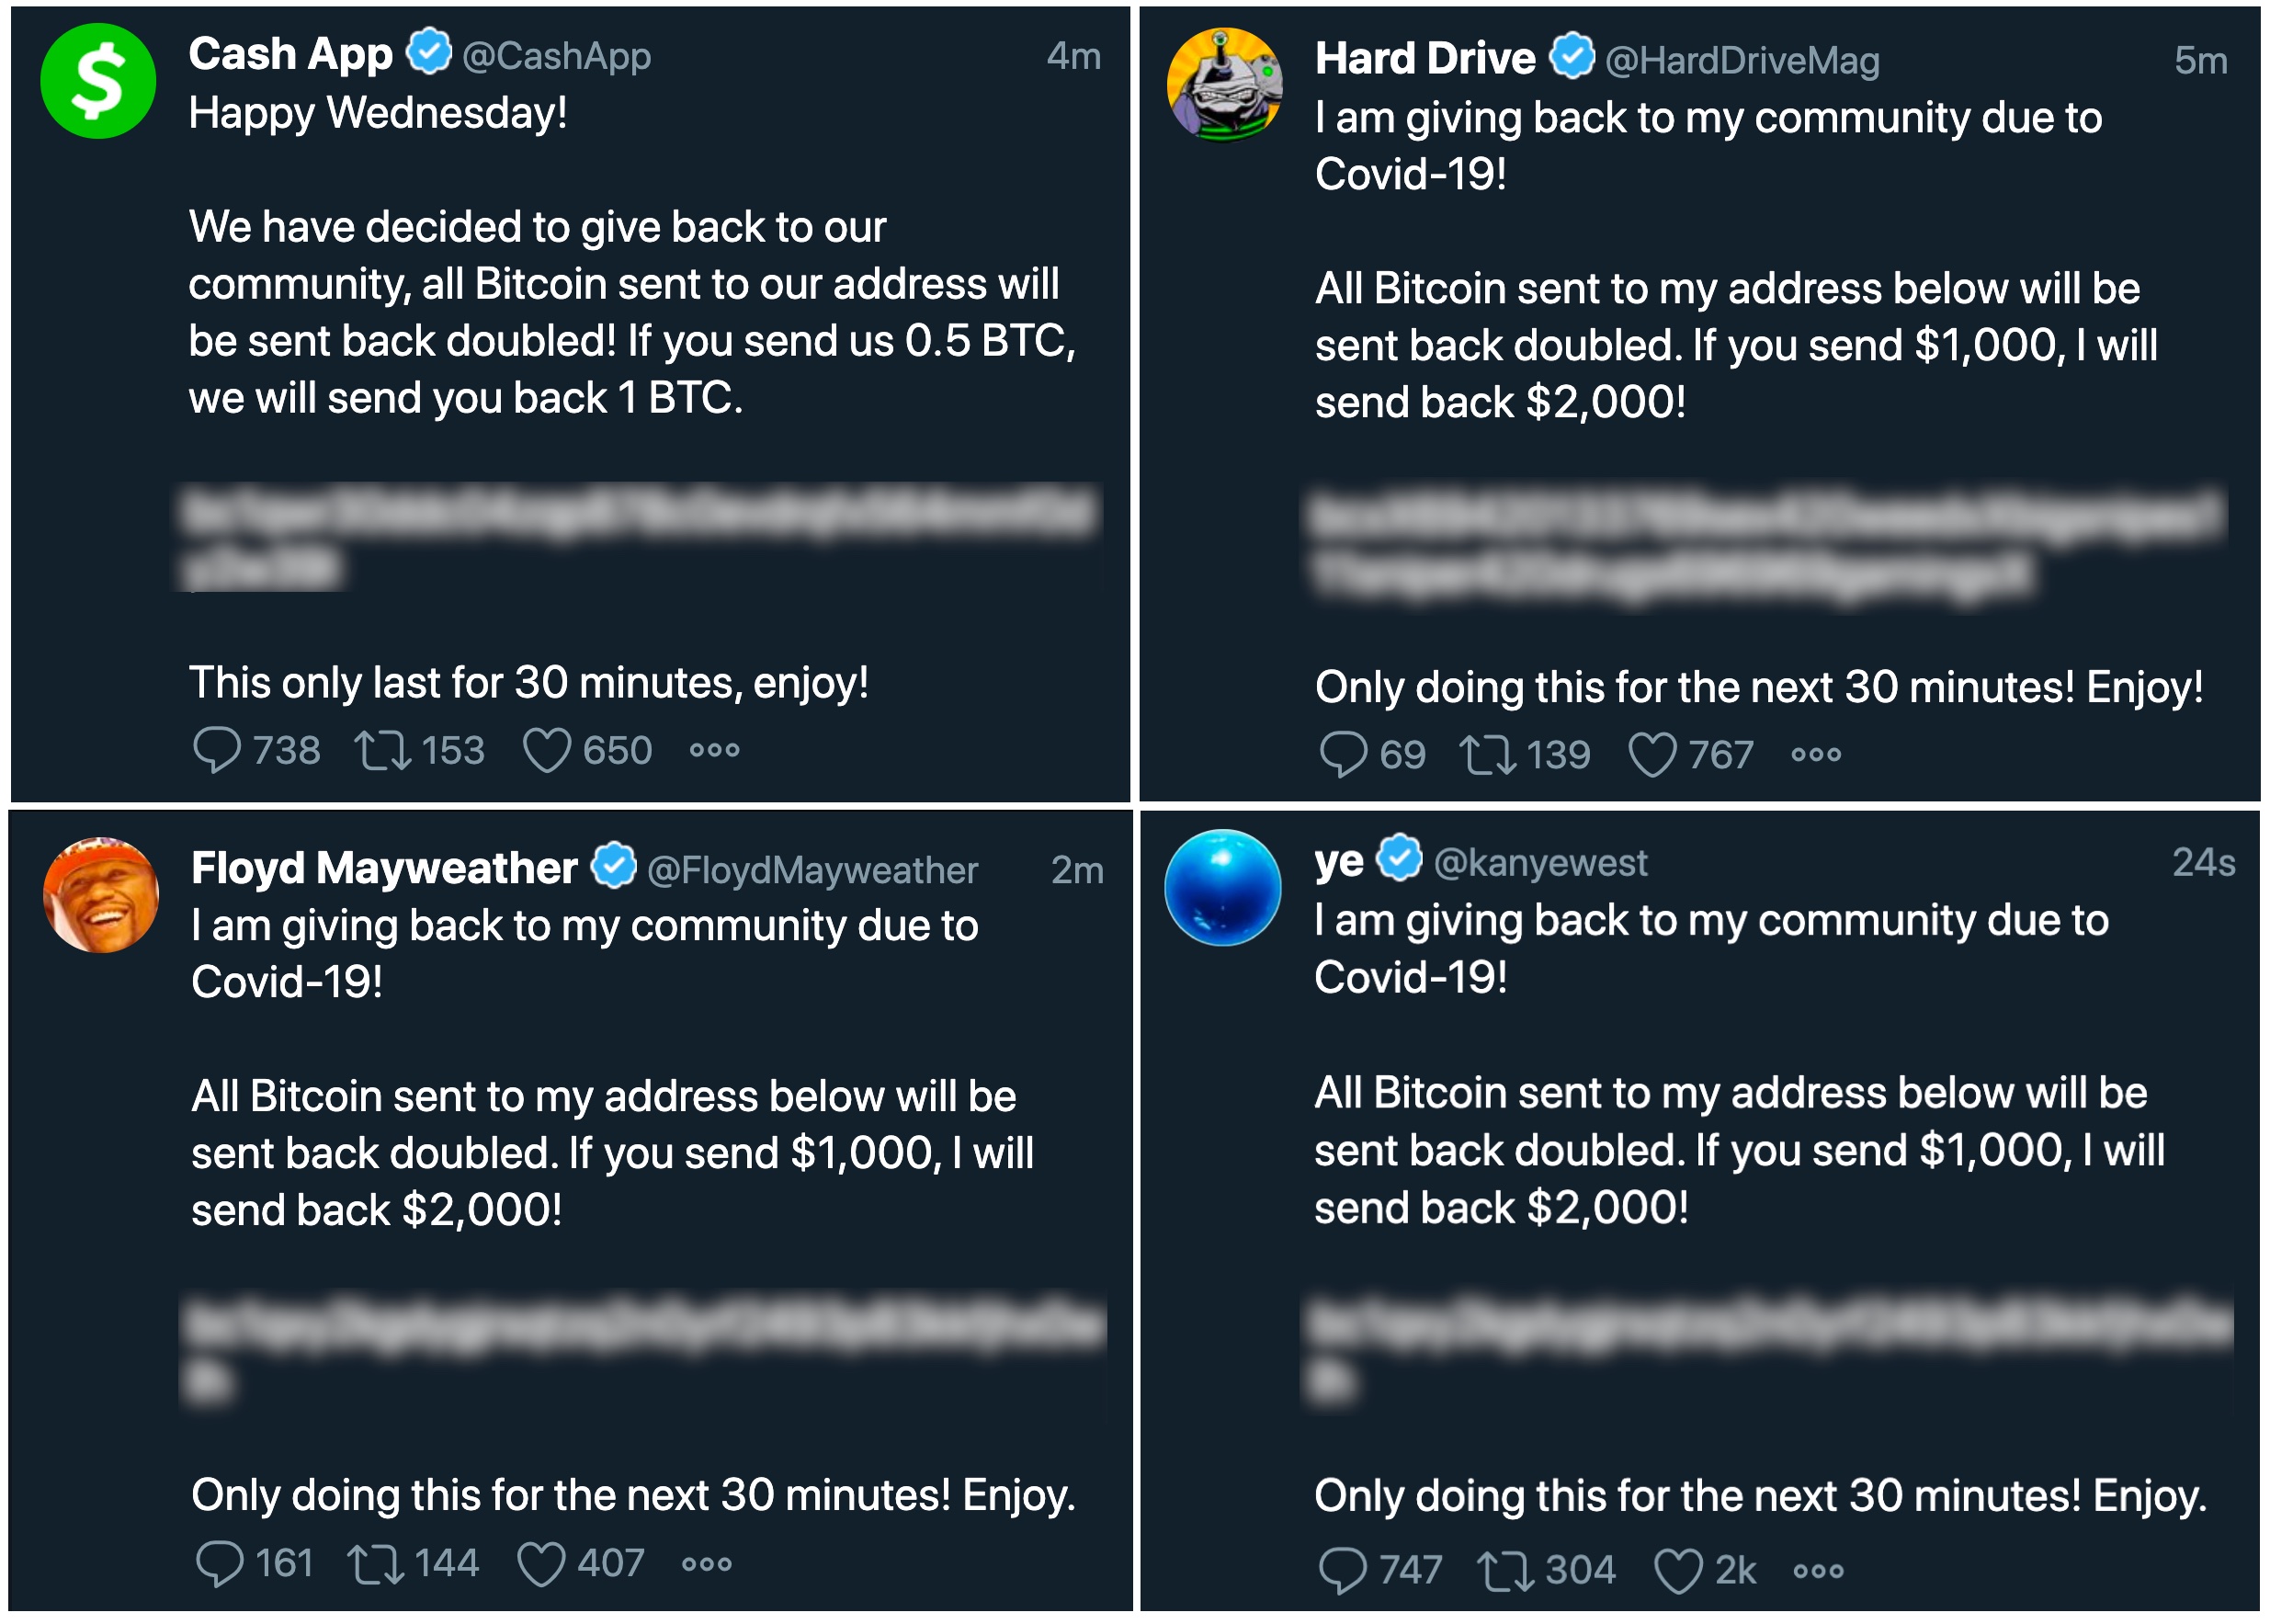 Several screenshots showing the tweets that were published during the Twitter 2020 hack